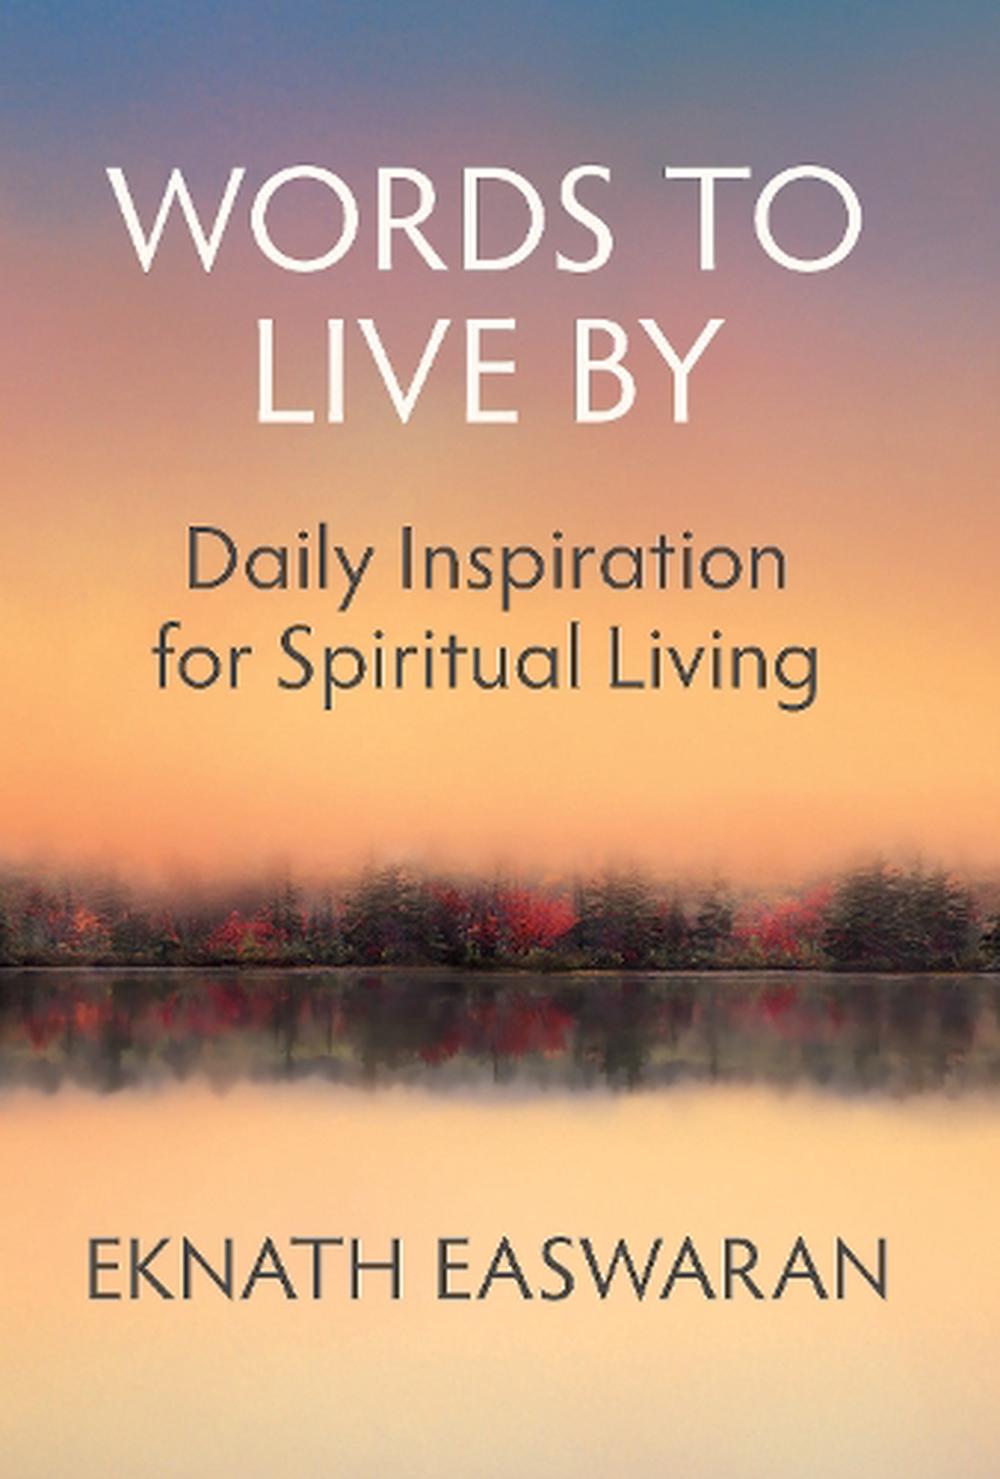 Words to Live by Short Readings of Daily Wisdom Daily